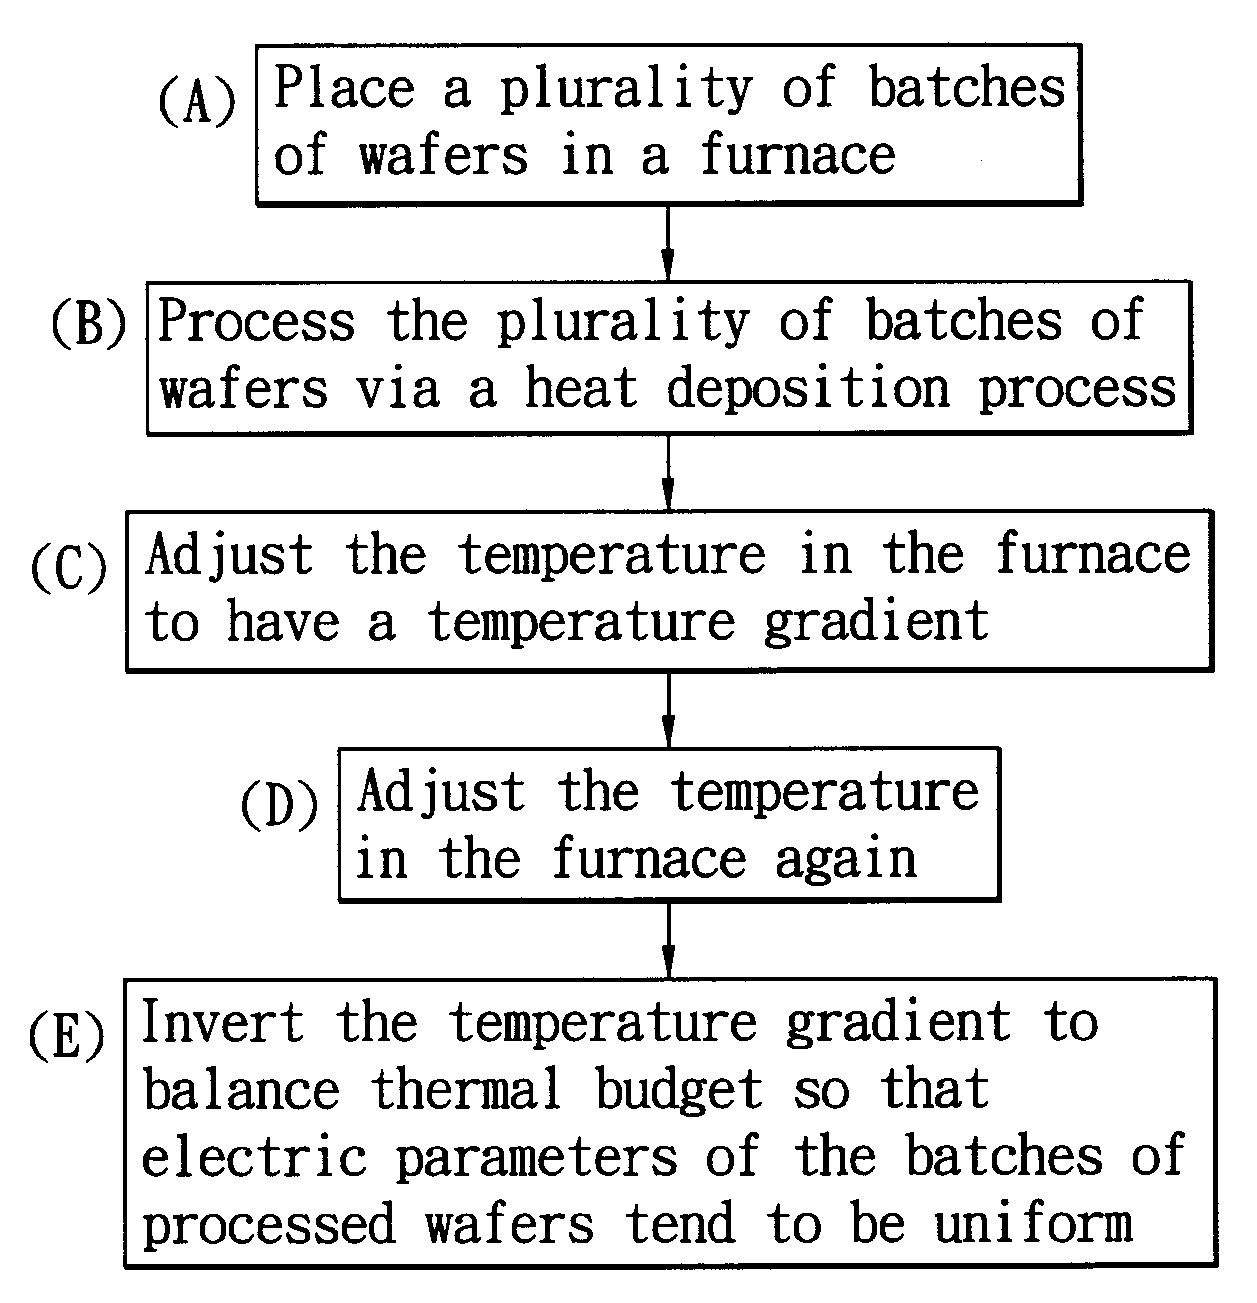 Furnace temperature control method for thermal budget balance